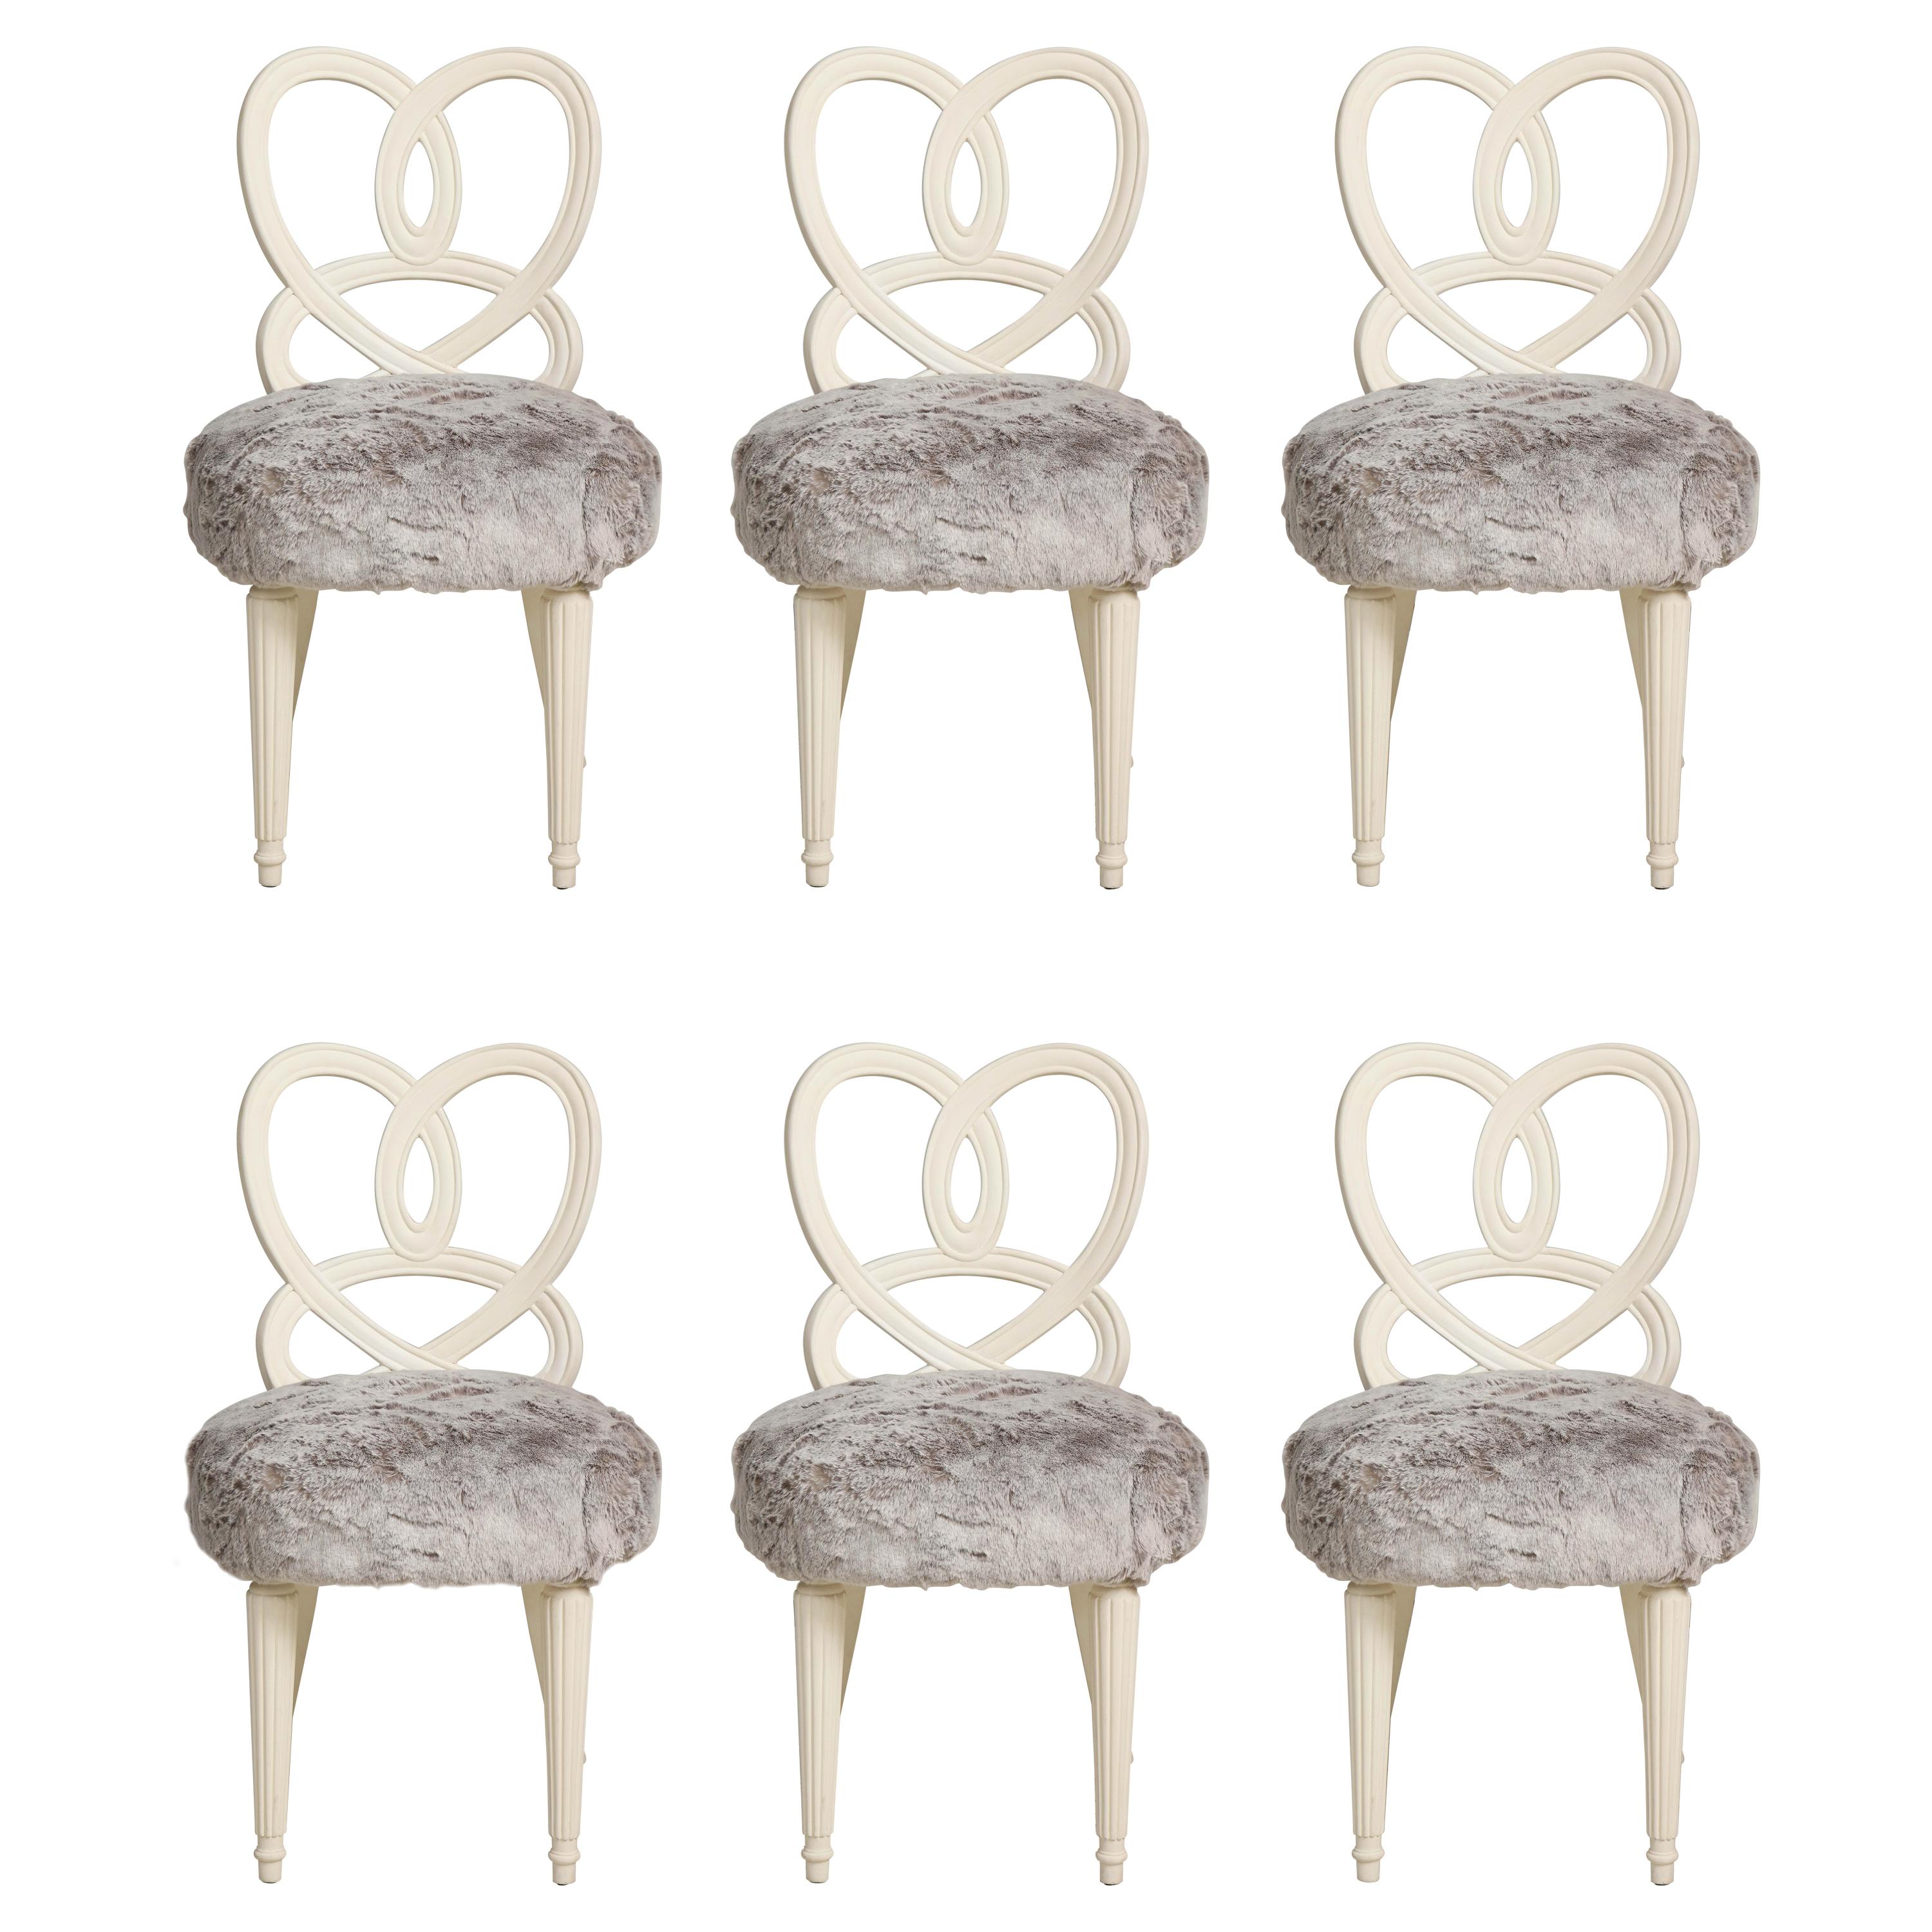 Set of 6 Vintage Hollywood Regency Chairs Upholstered in Faux Fur